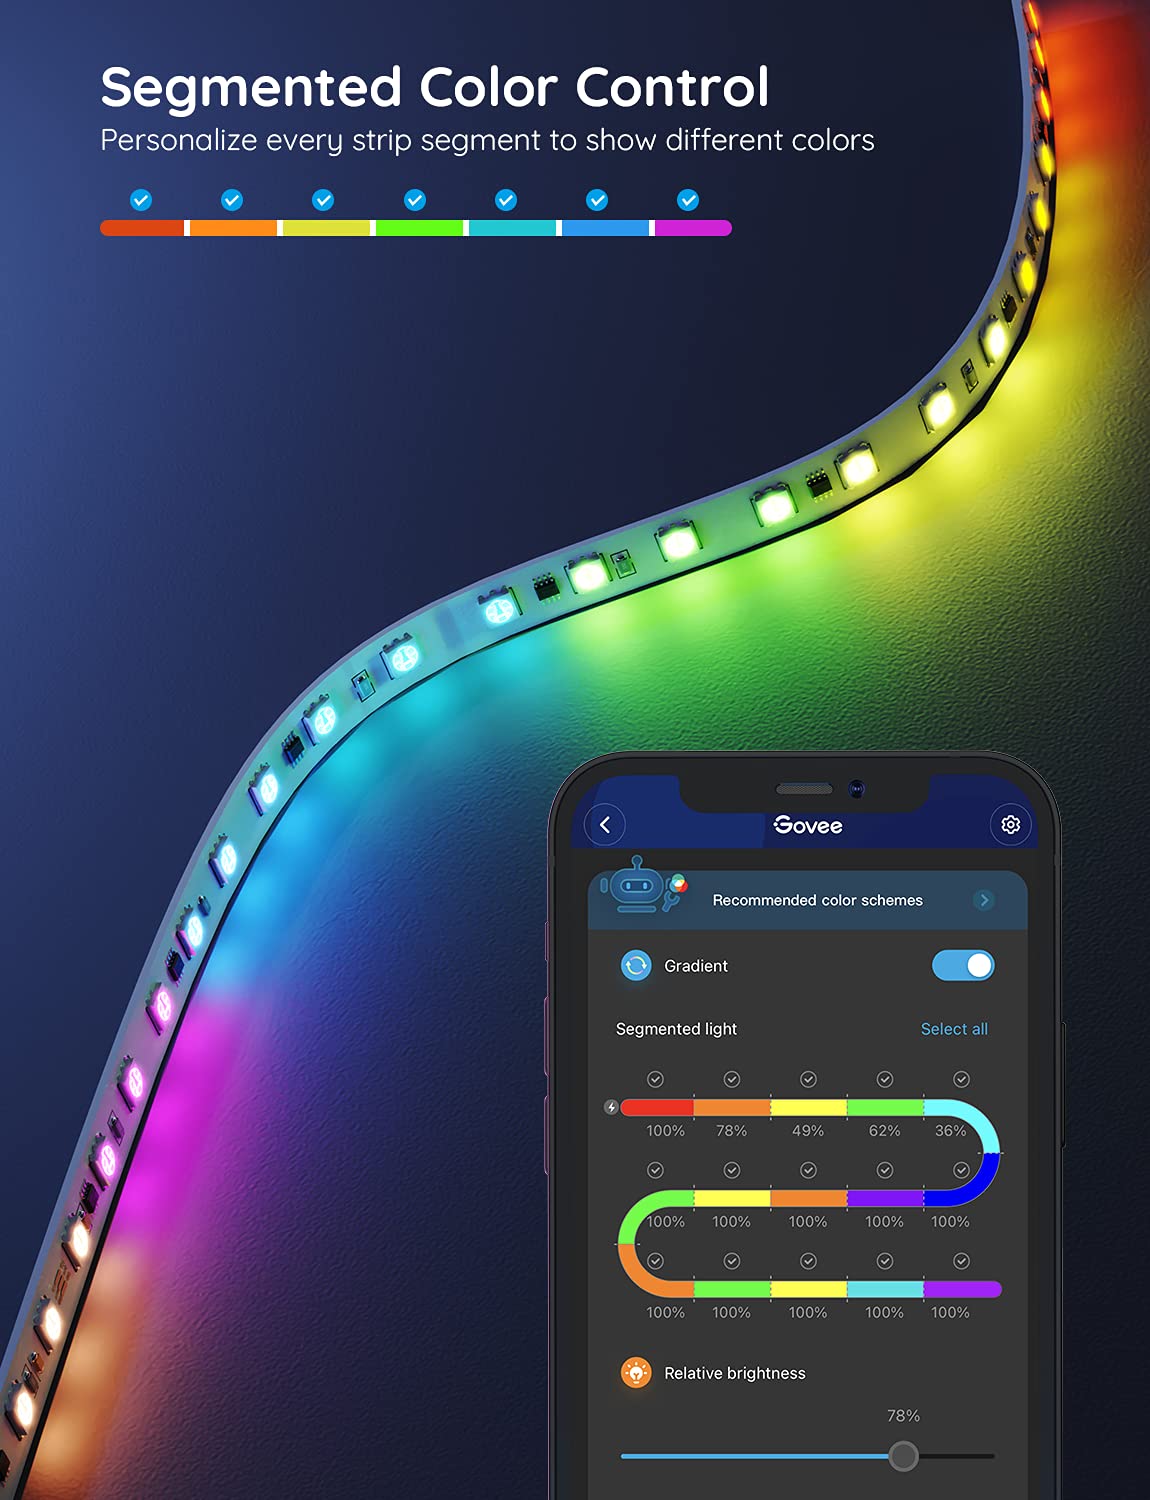 Govee LED Strip Lights RGBIC, 16.4ft Bluetooth Color Changing LED Lights with Segmented App Control, Smart LED Strip Color Picking, Music Sync LED Lights for Bedroom, Living Room, Party, Mother's Day